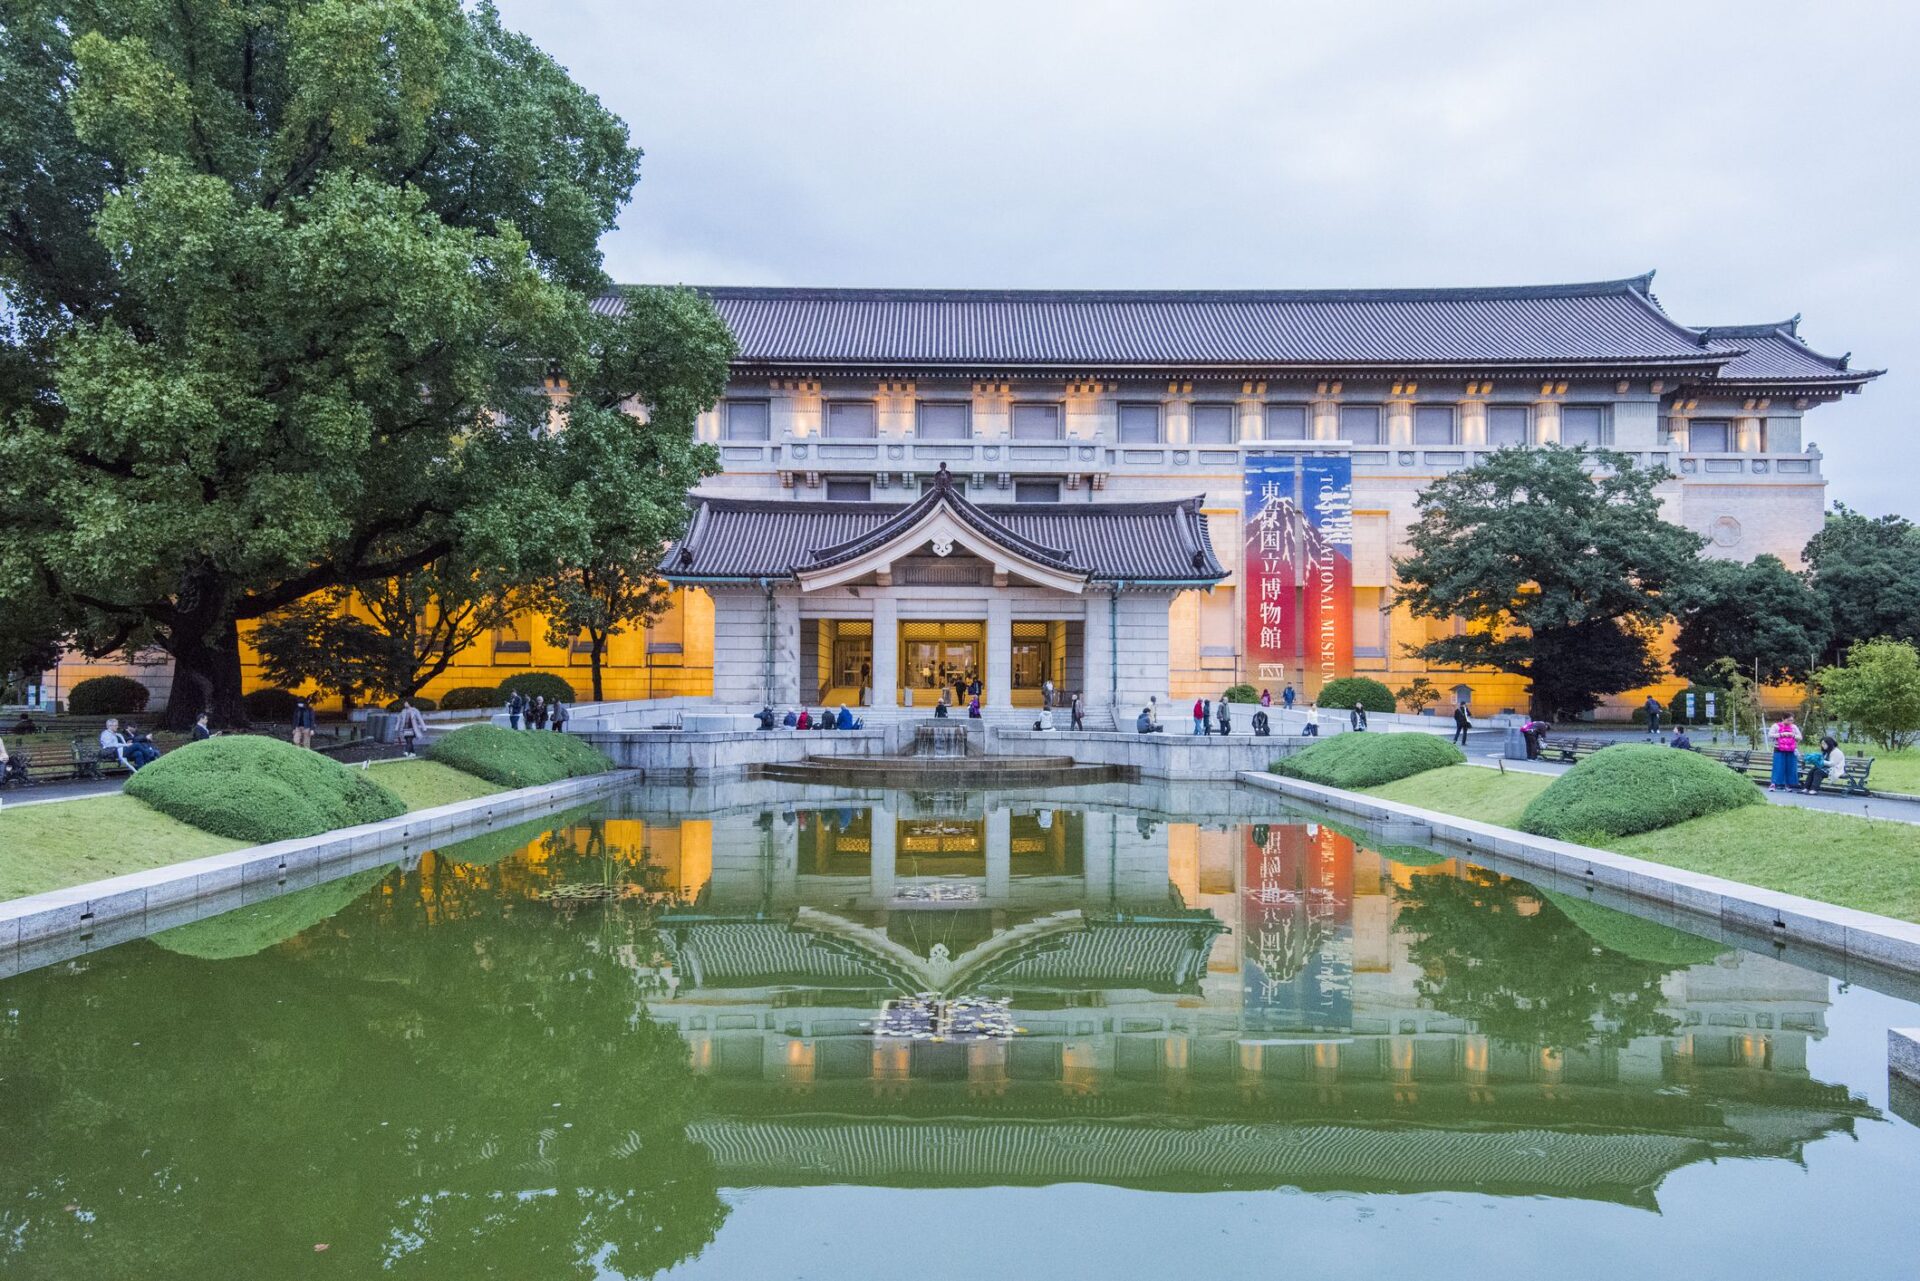 Tokyo National Museum: The Complete Guide